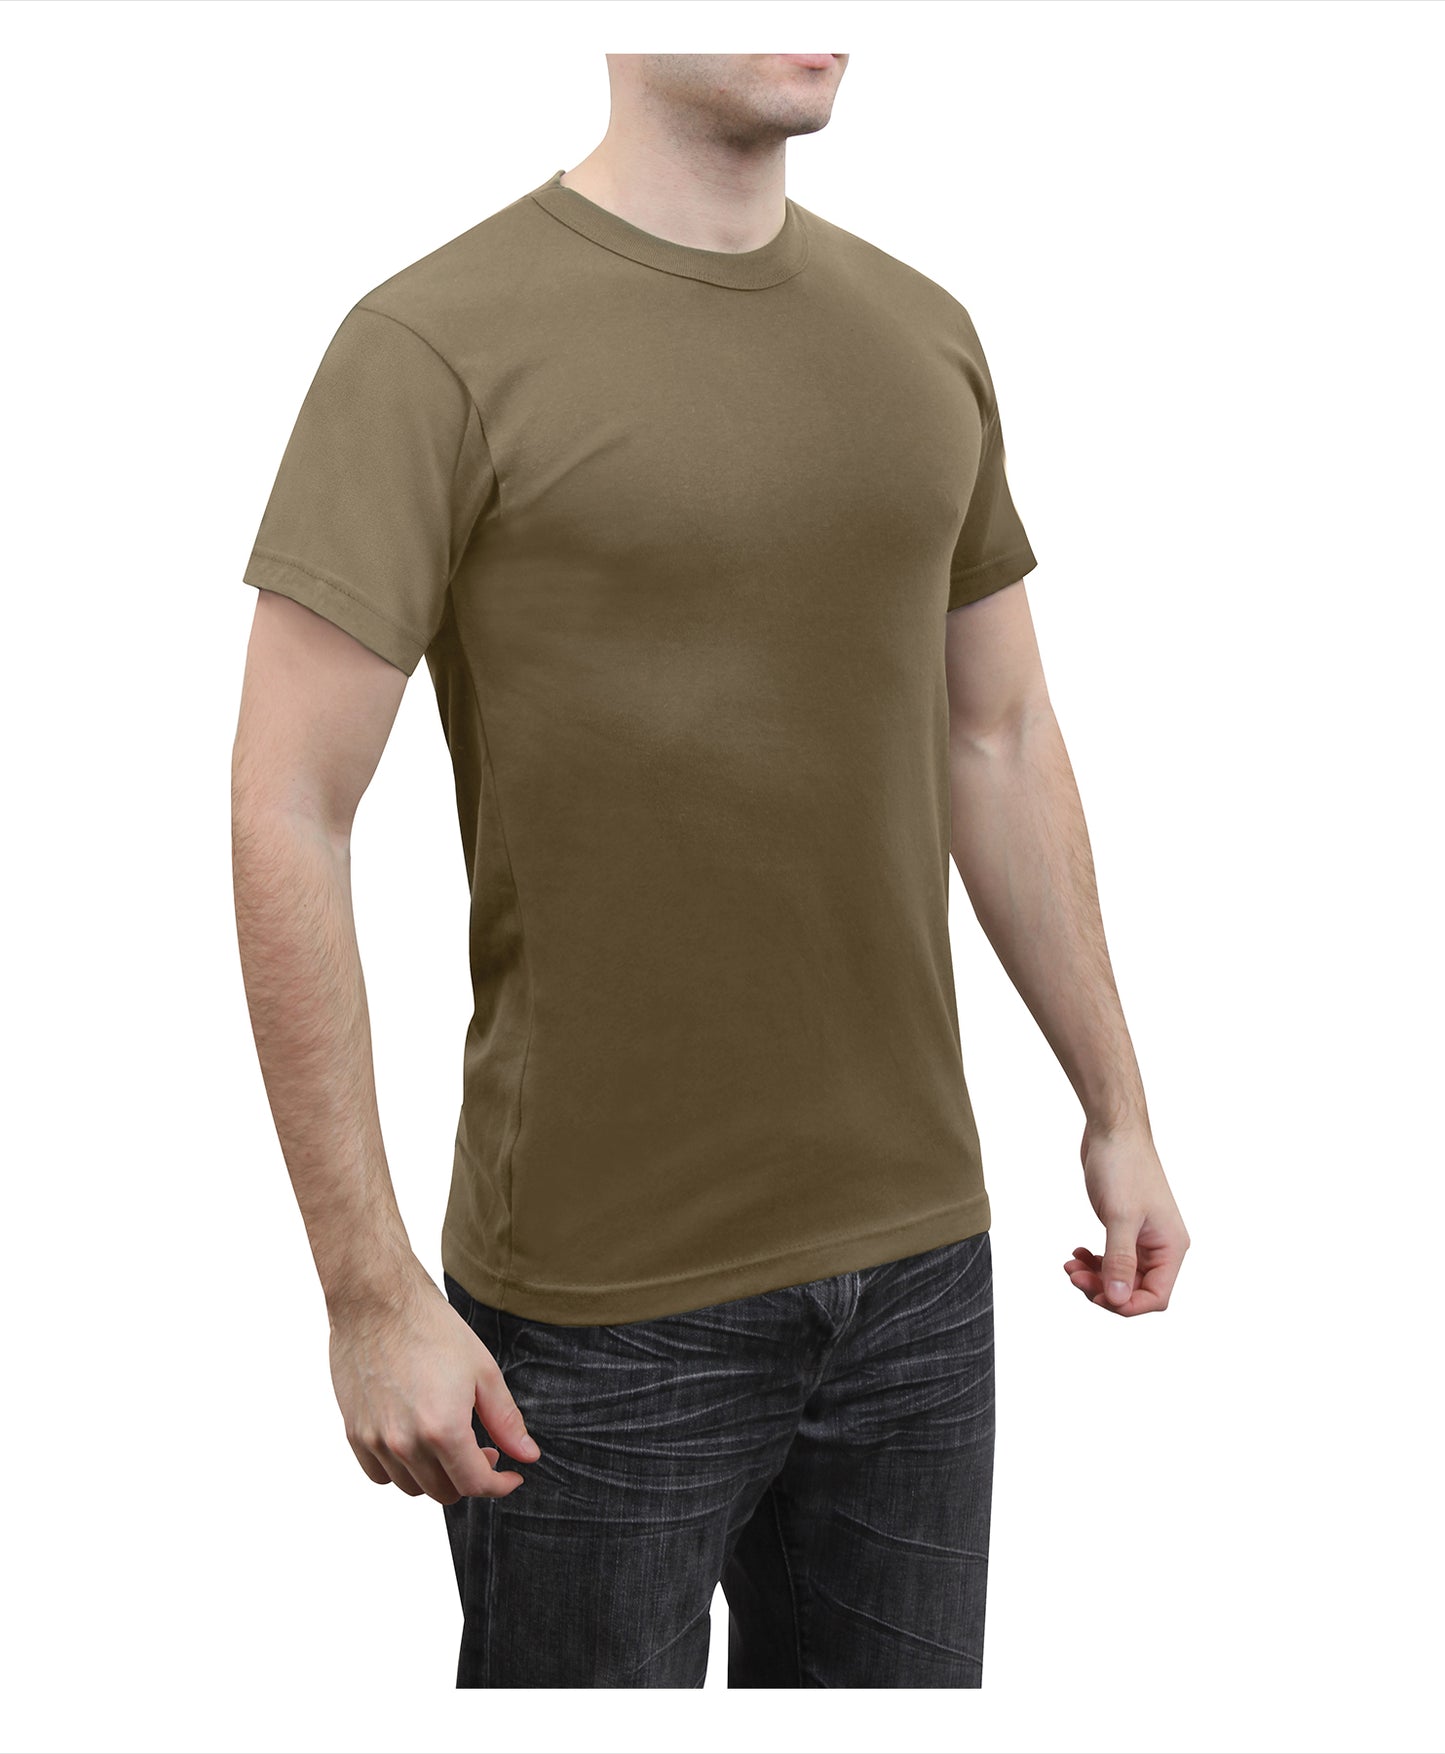 Rothco Solid Color Cotton Polyester Blend Military T-Shirt